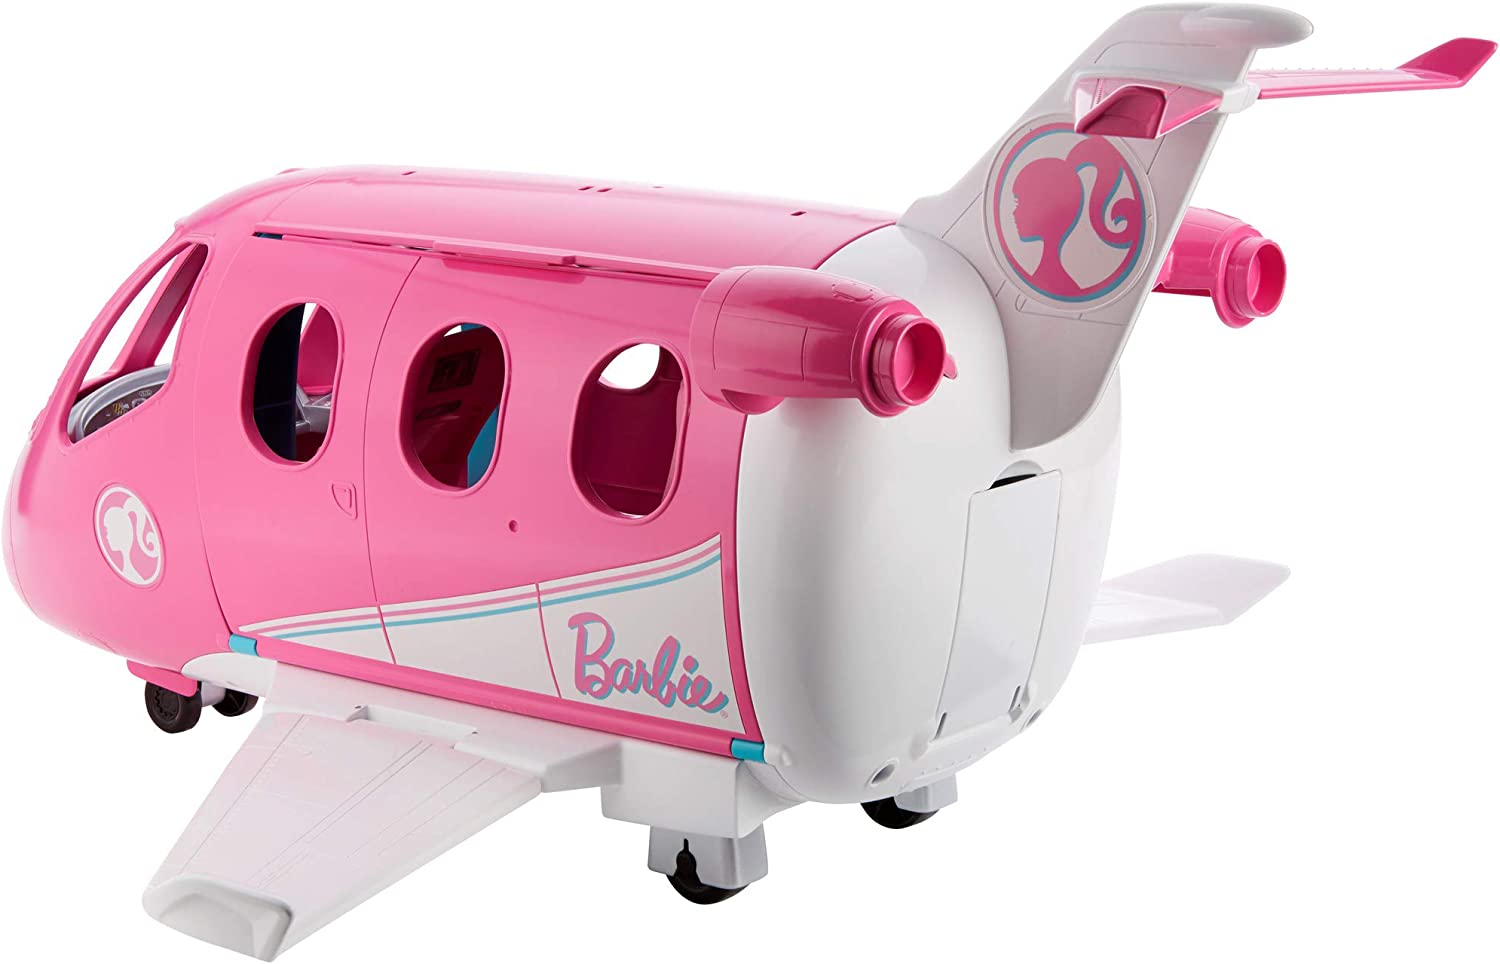 Barbie Dreamplane Airplane Toys Playset with 15+ Accessories